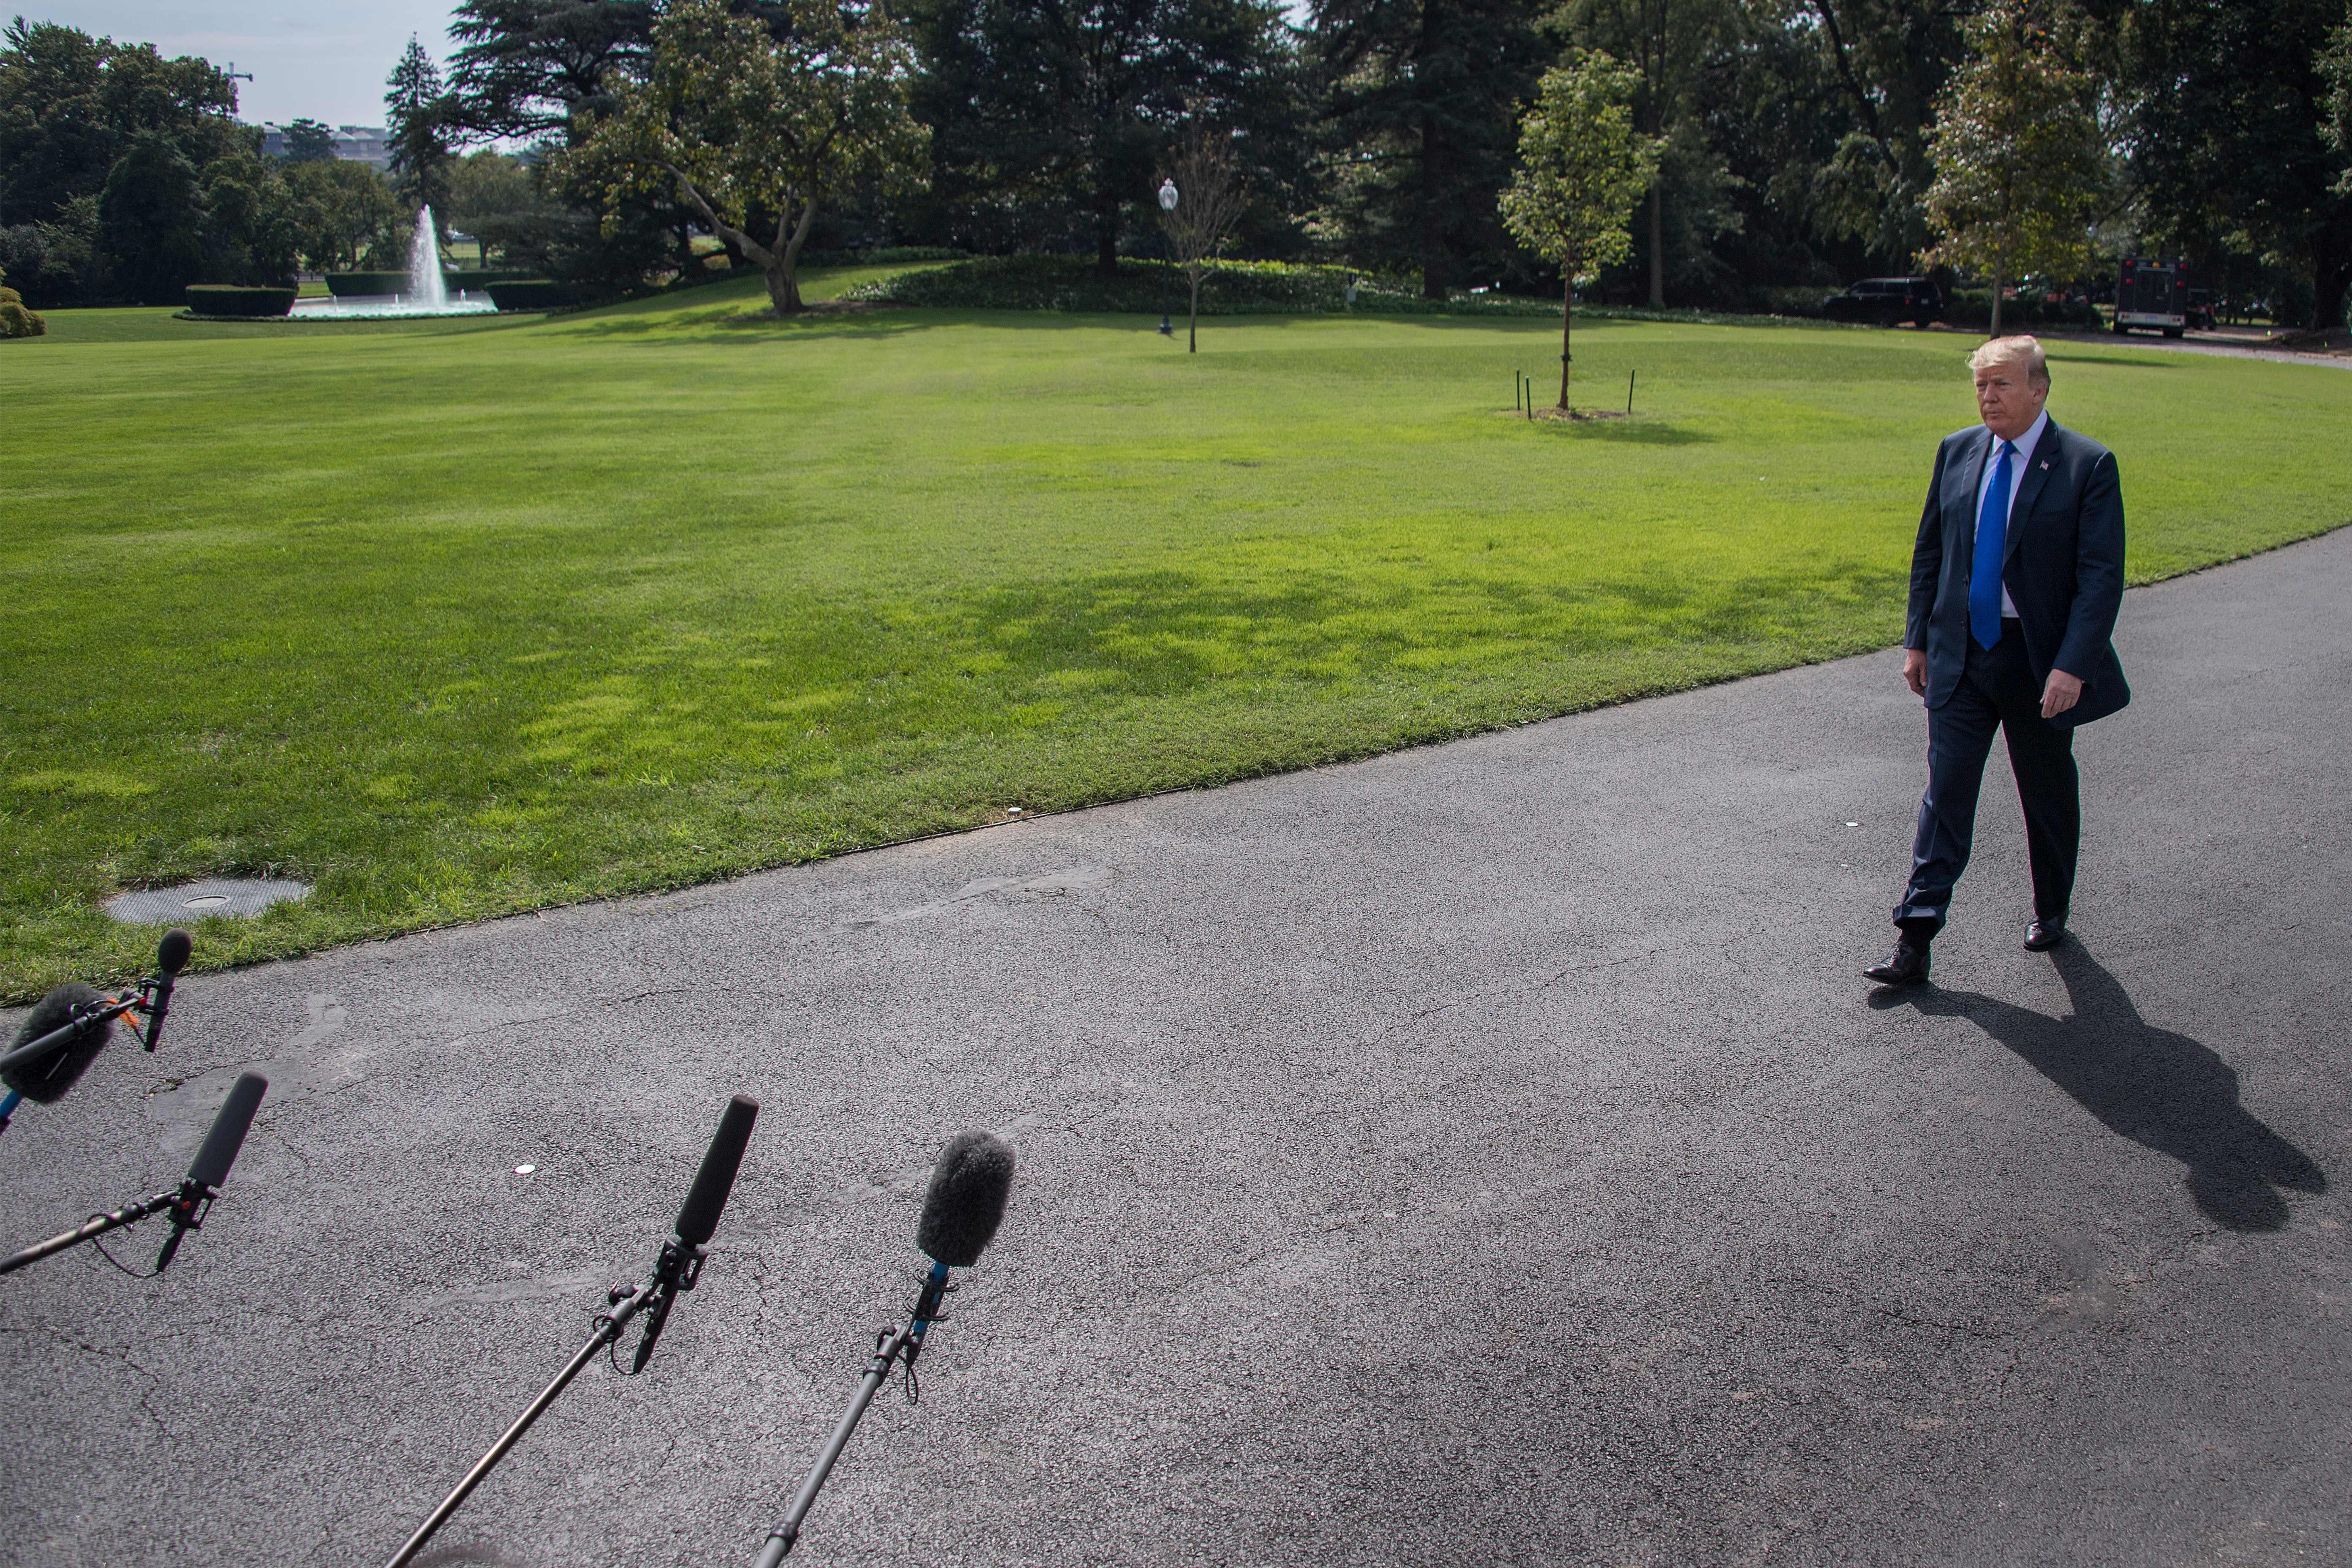 President Donald Trump approaching microphones at the White House on Tuesday.